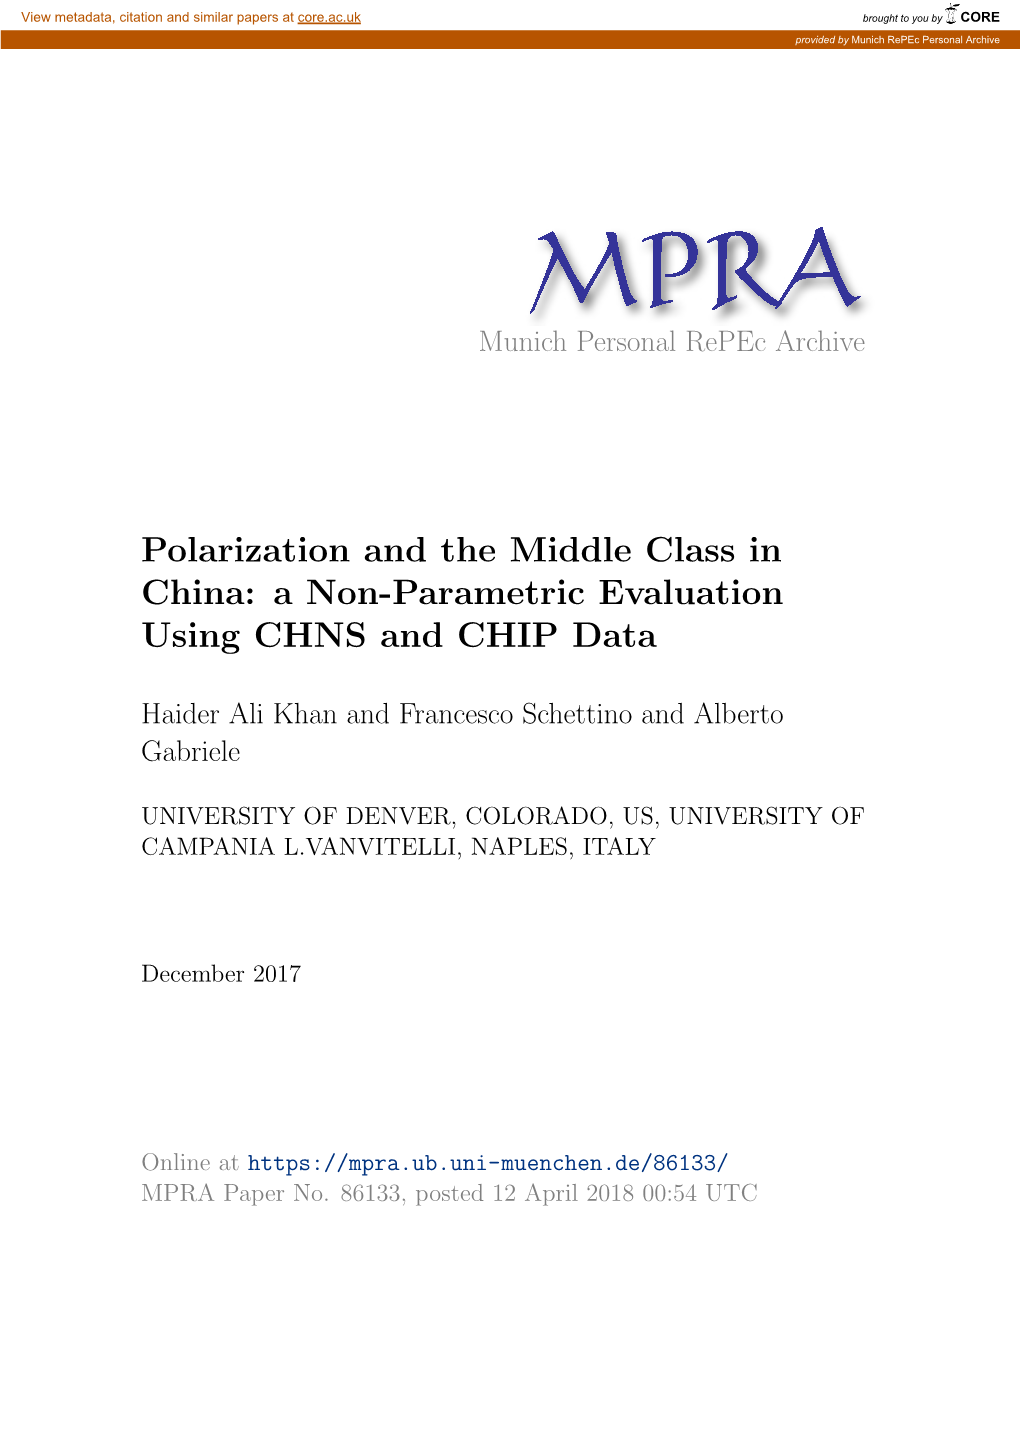 Polarization and the Middle Class in China: a Non-Parametric Evaluation Using CHNS and CHIP Data